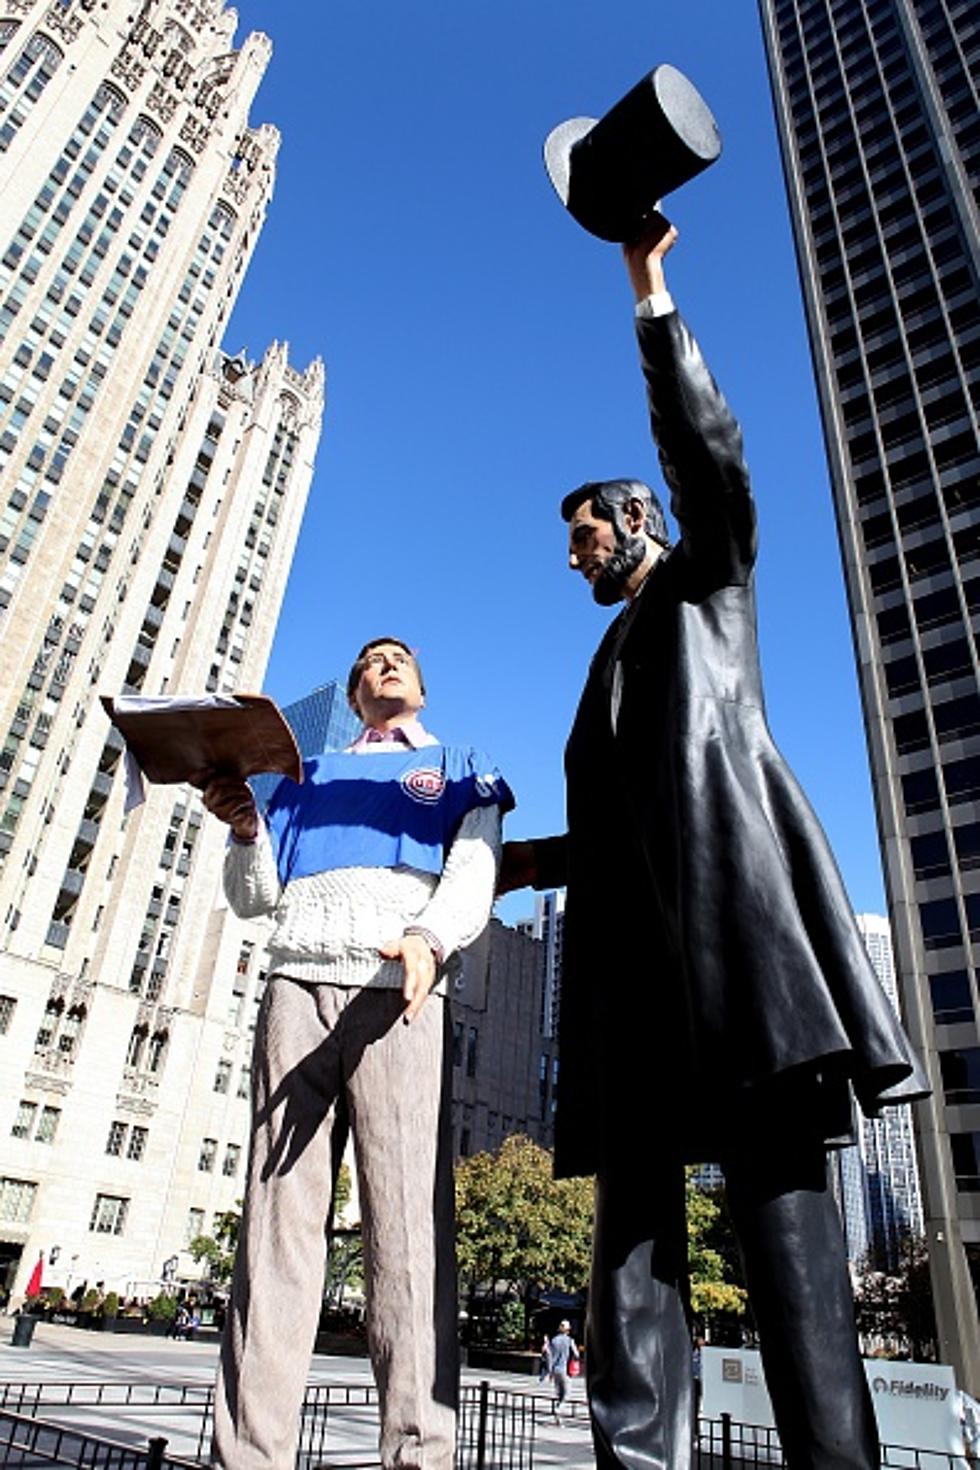 31-Foot Tall Lincoln Statue Makes Springfield Debut